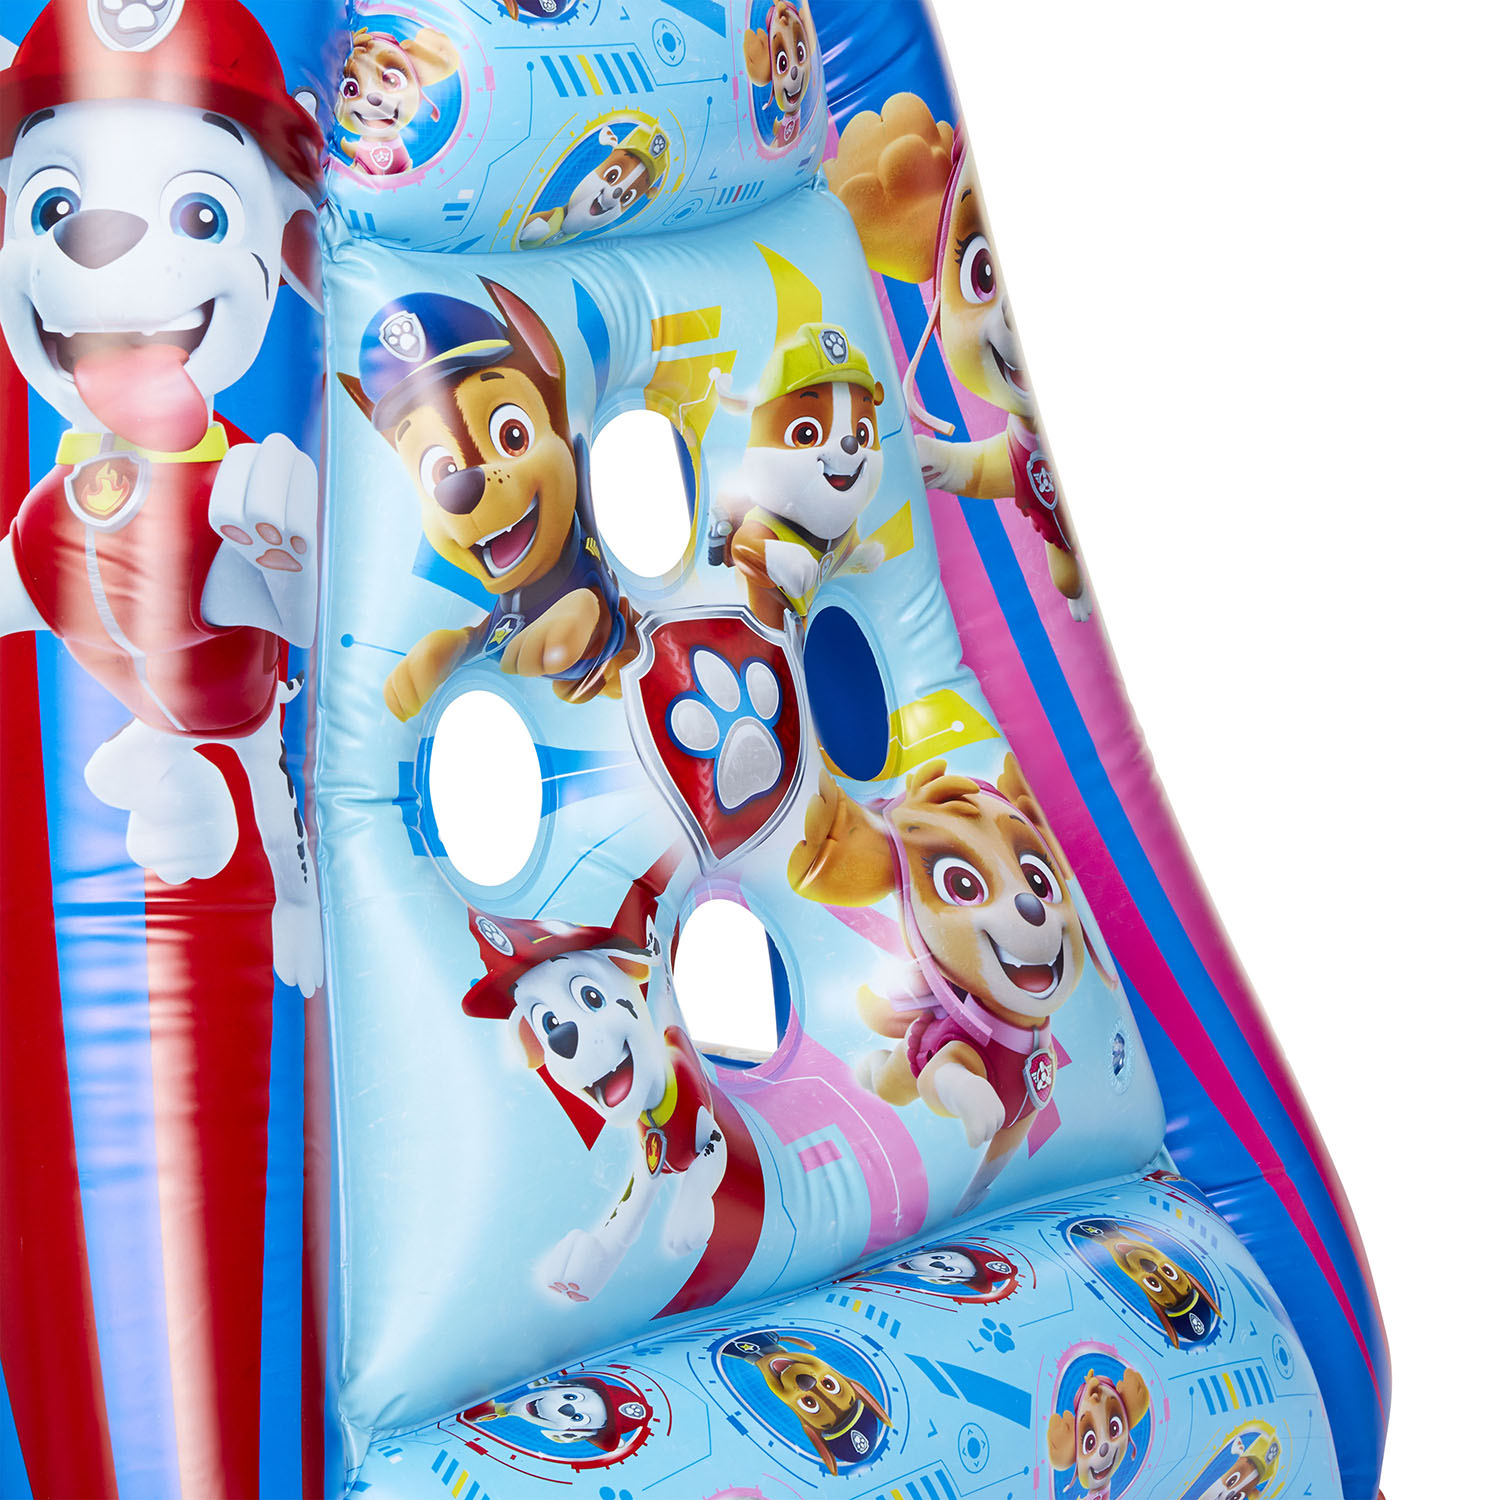 Paw Patrol Inflatable Playland Ball Pit with 20 Soft Flex Balls - image 2 of 5